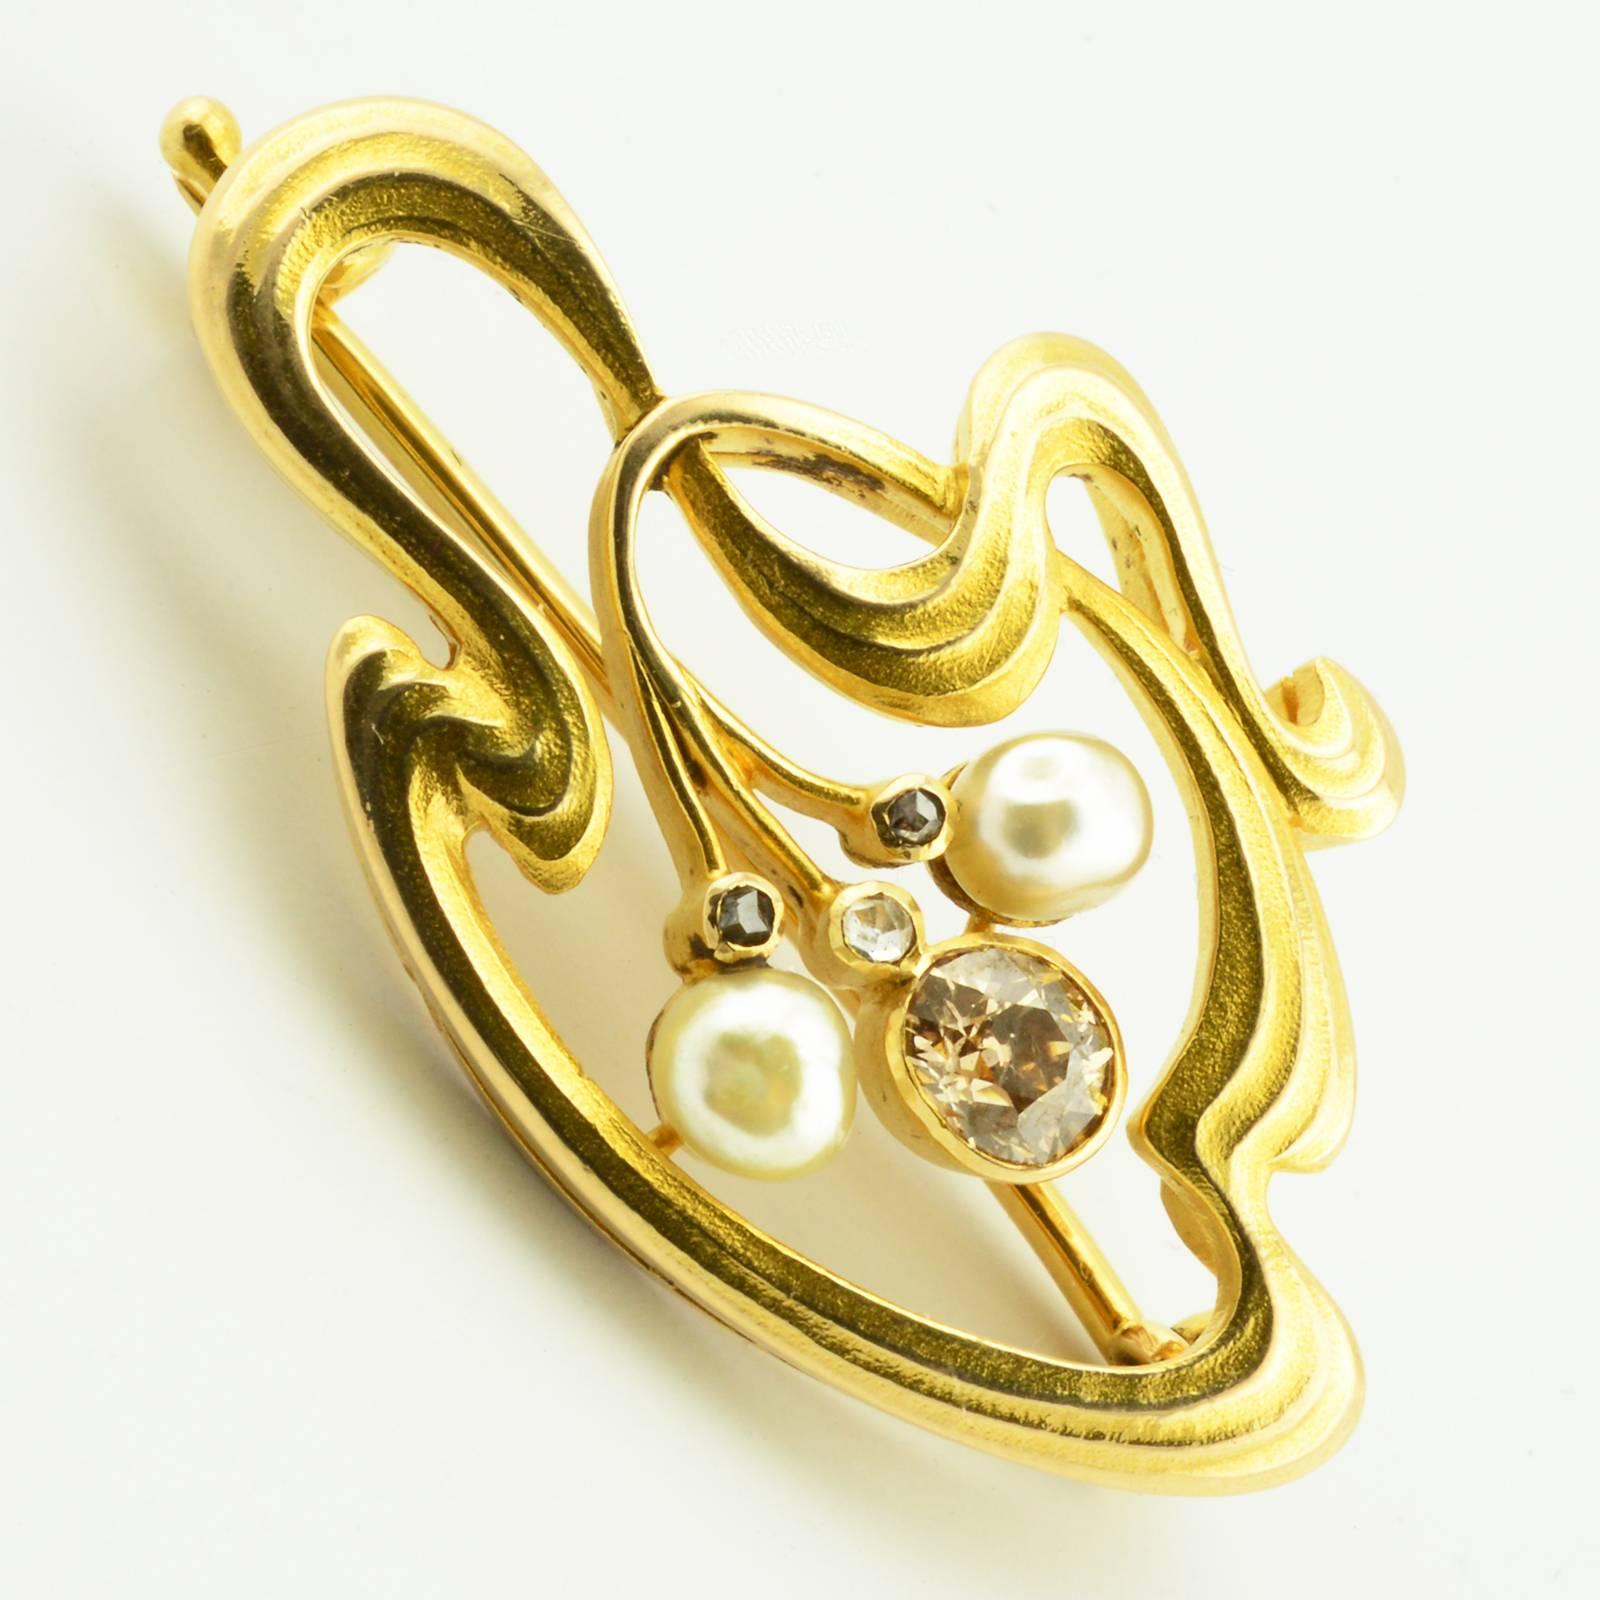 An antique Russian Art Nouveau gold, white diamond, brown diamond, and pearl brooch or pin by Imperial Court Jeweler Karl Bok (Bock), St. Petersburg, 1899-1904. The brooch cast and chased in Art Nouveau taste as a continuous oval whiplash